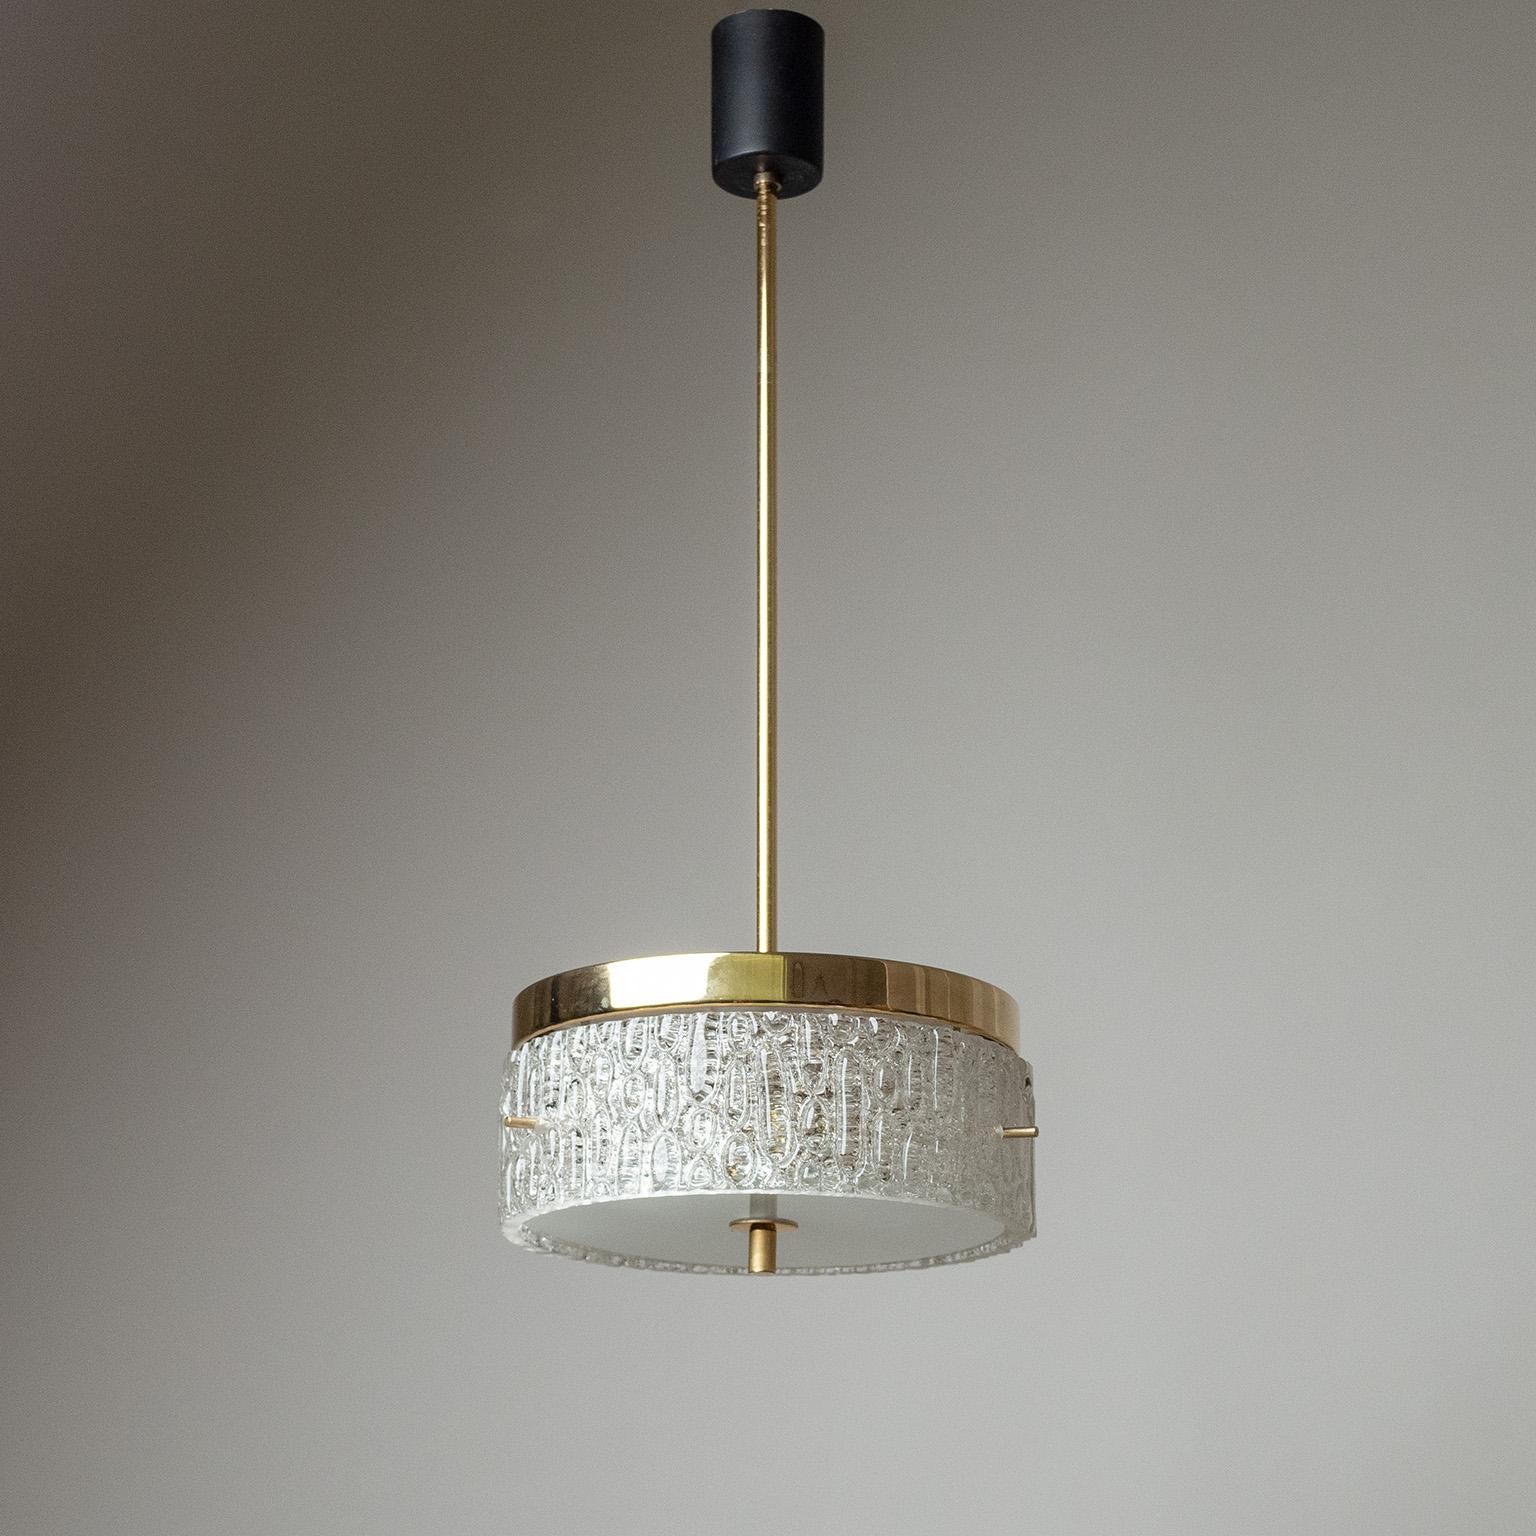 Fine French modernist ceiling light from the 1960s attributed to Maison Arlus. Minimalist gilt brass hardware with a thick and heavily textured glass diffuser. Two brass and ceramic E14 sockets with new wiring. Height without the stem is 11cm/4.3